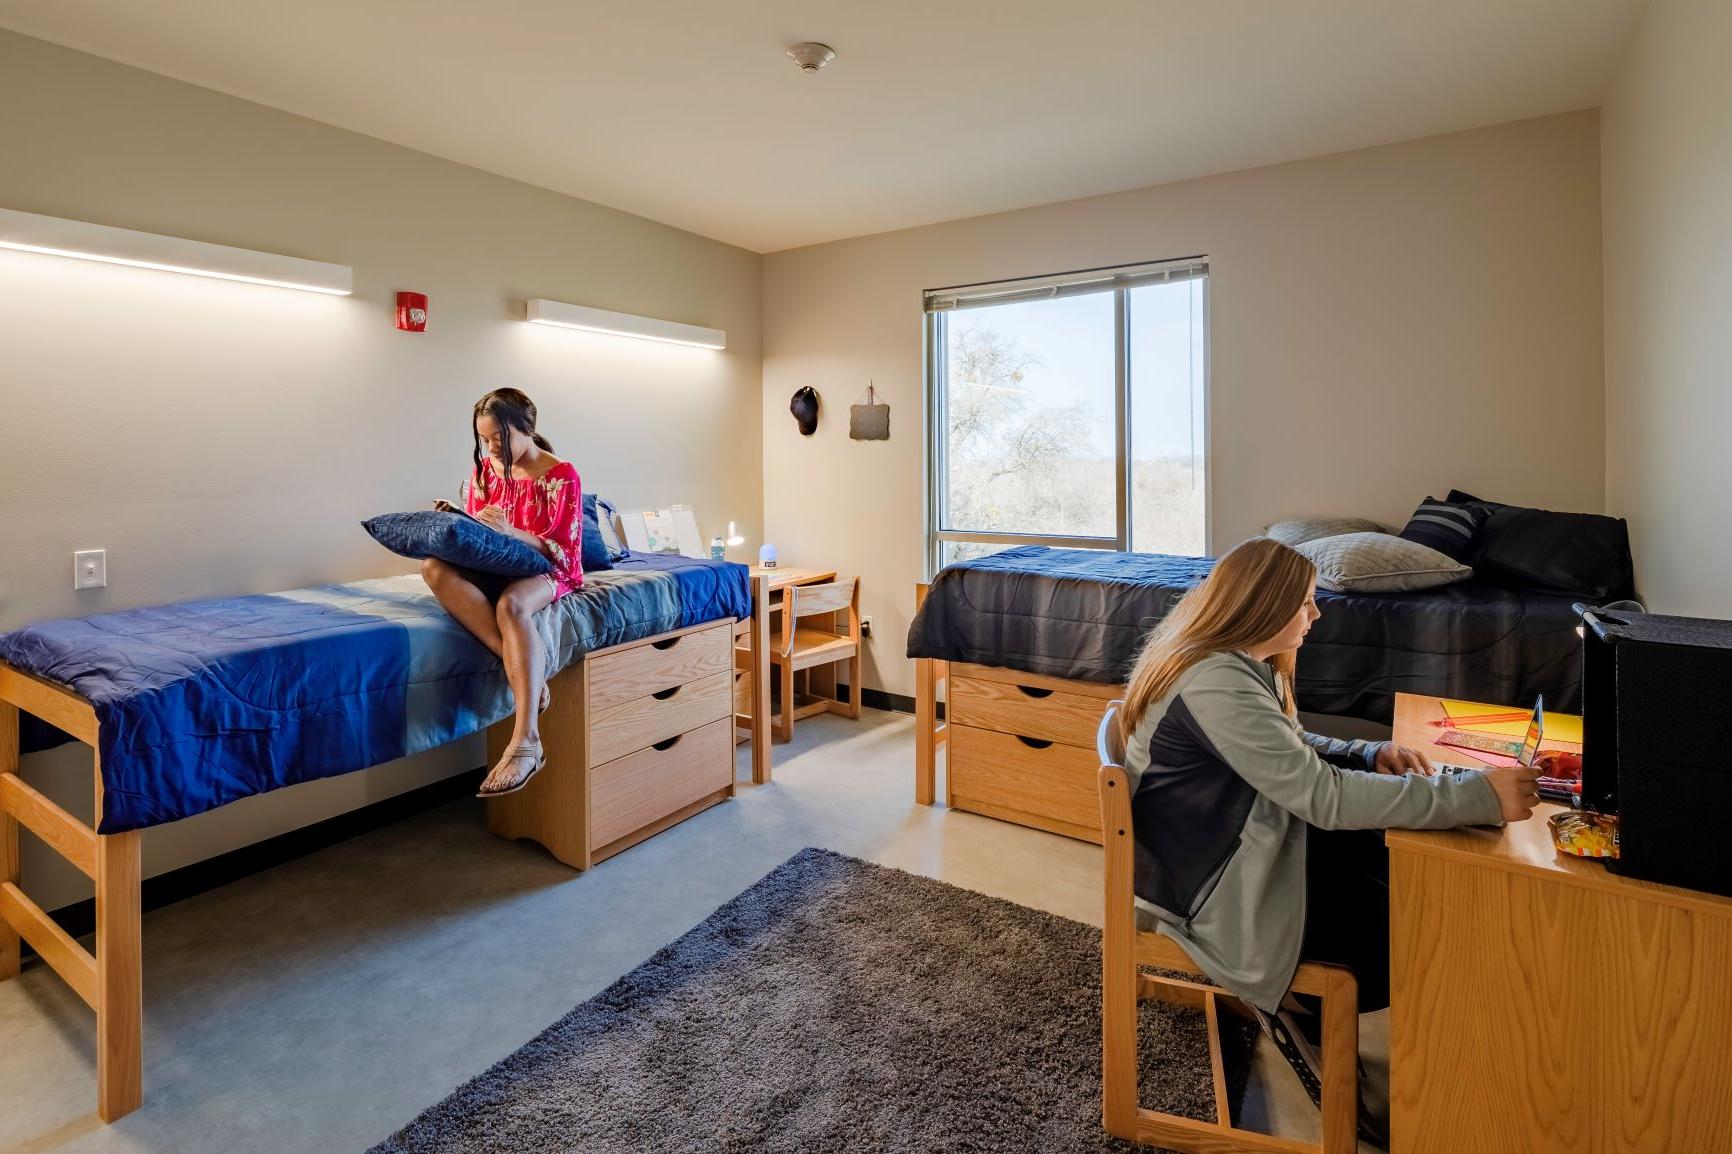 Inside of dorm room with two students studying. Viewing window, two beds, two desks